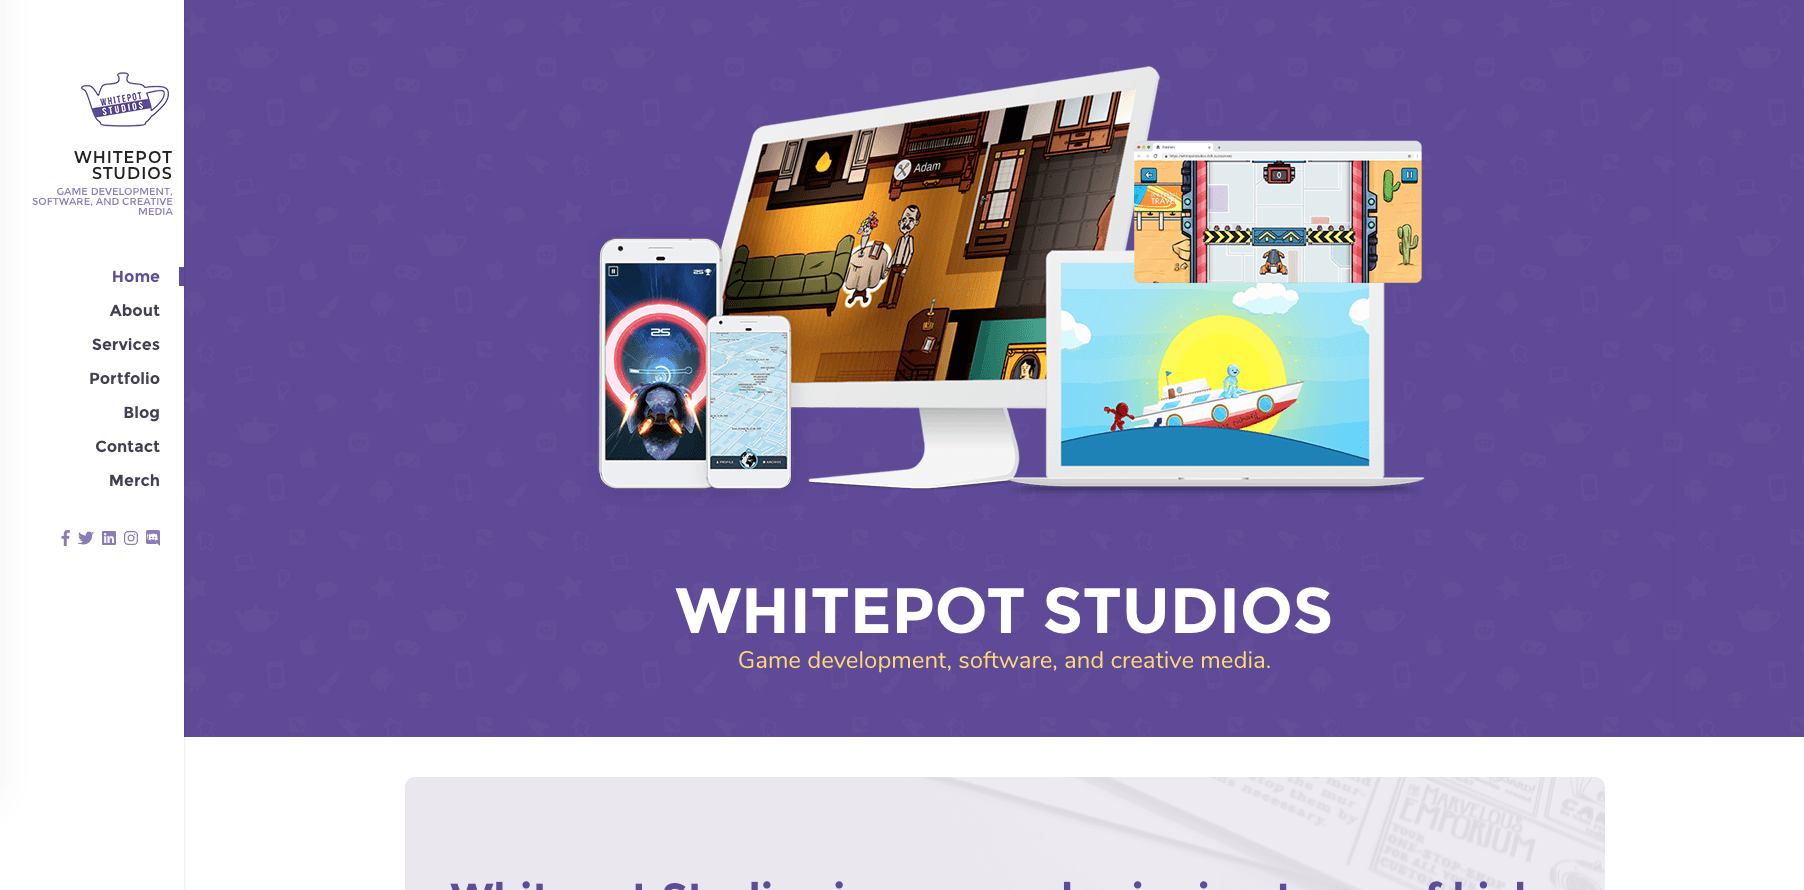 Whitepot Studios - Portfolio image showing our game development, software development, and creative media work for PC, Console, Web, and Mobile